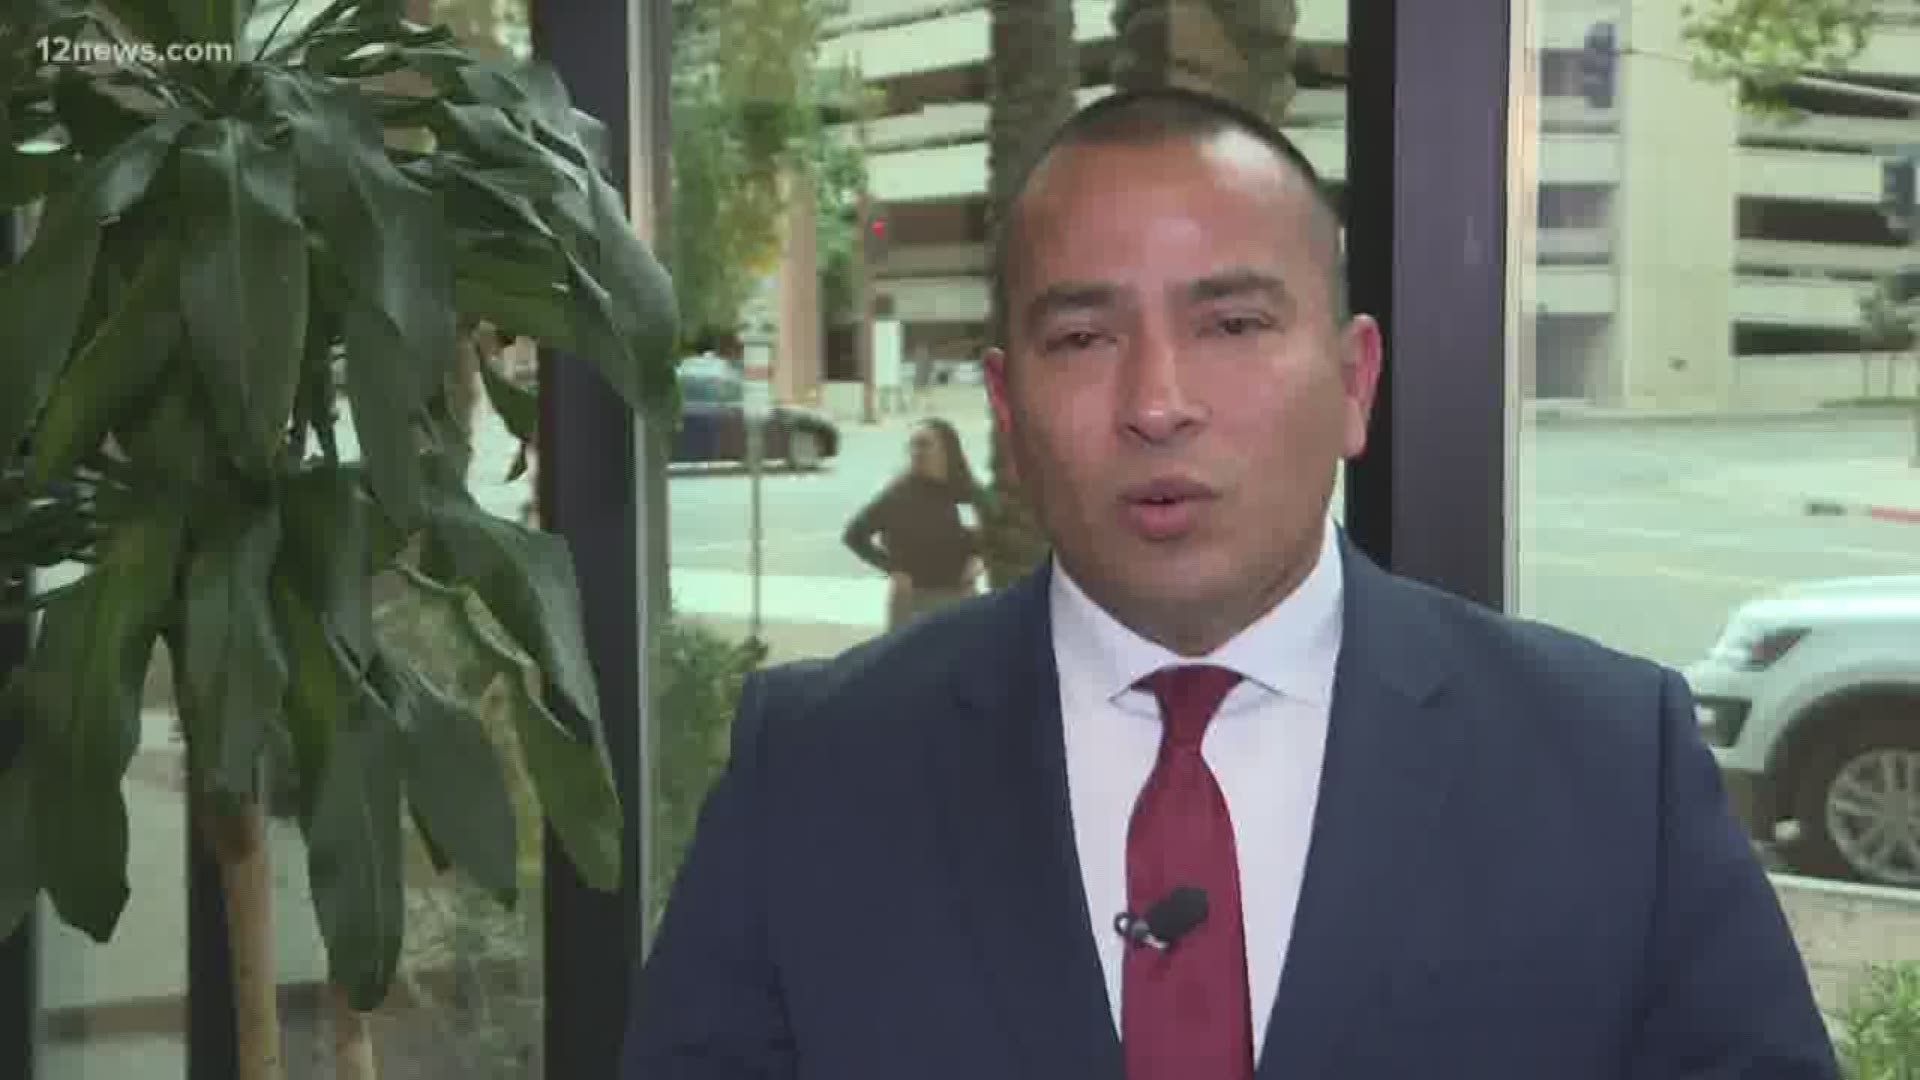 Phoenix mayoral candidate Daniel Valenzuela came to the aid of a man who was hit by a truck last night. We spoke to him today about what was going through his mind as he stopped to help.